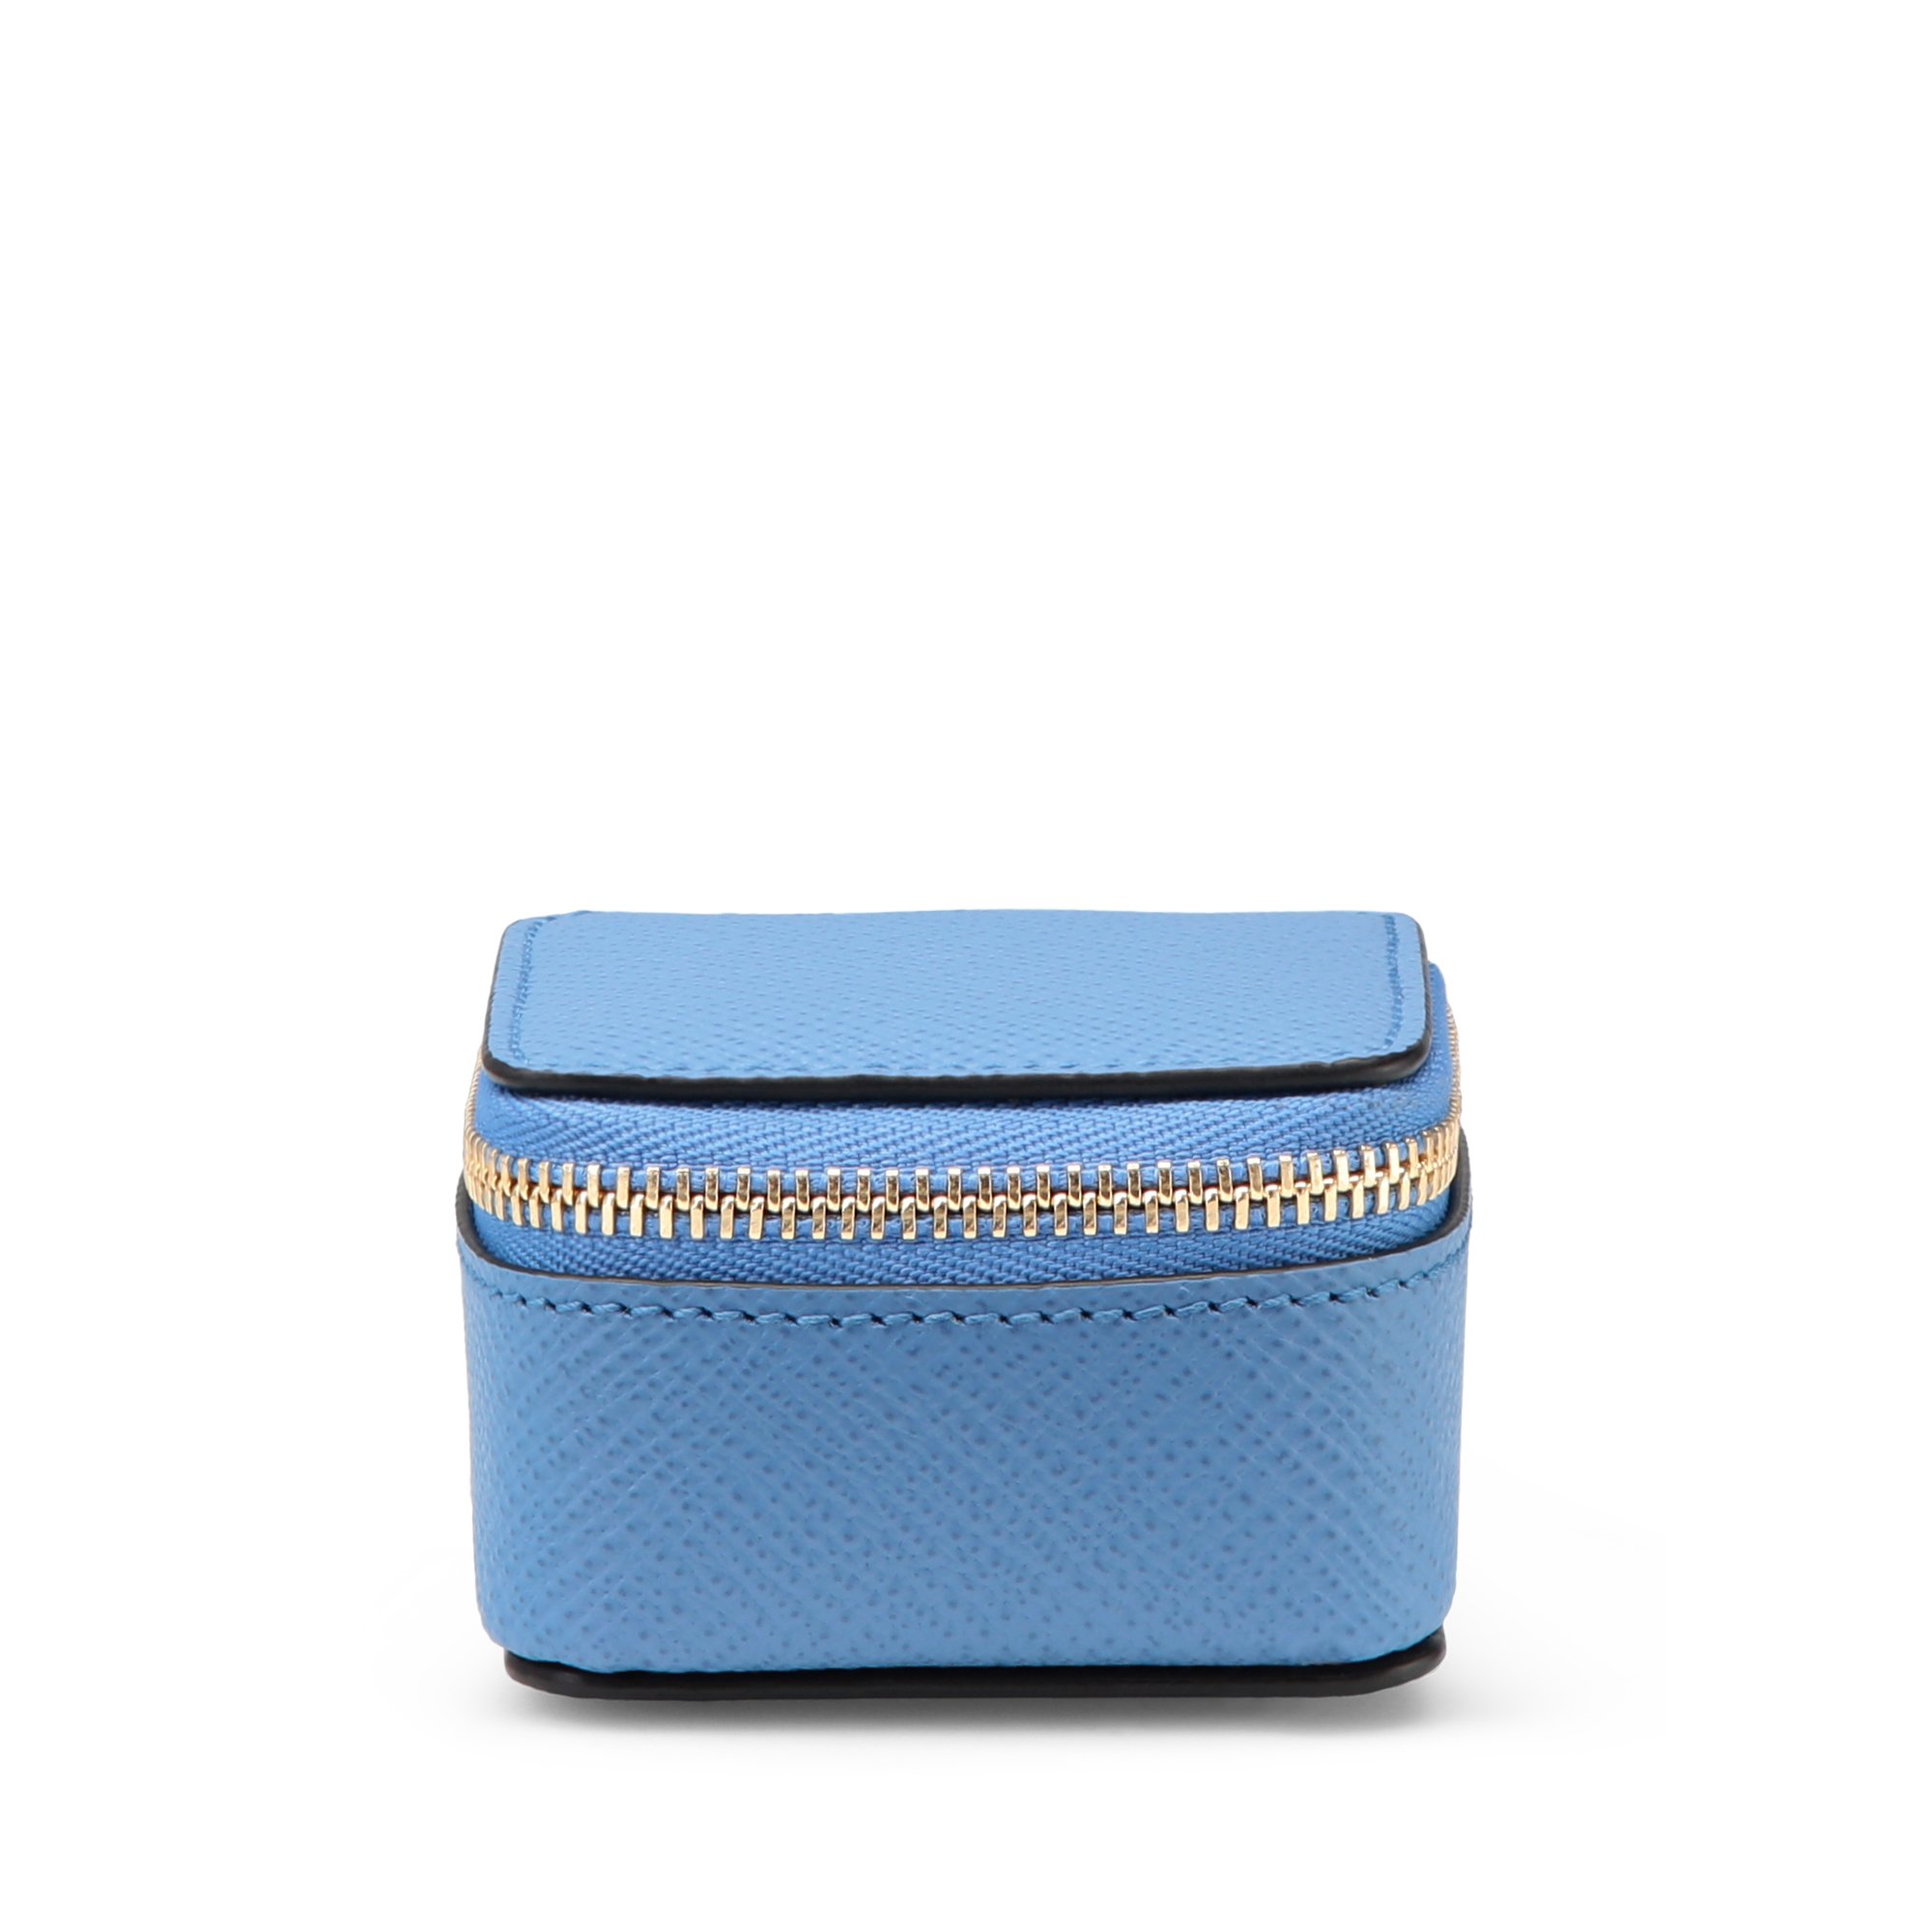 Smythson Small Square Trinket Case In Panama In Nile Blue